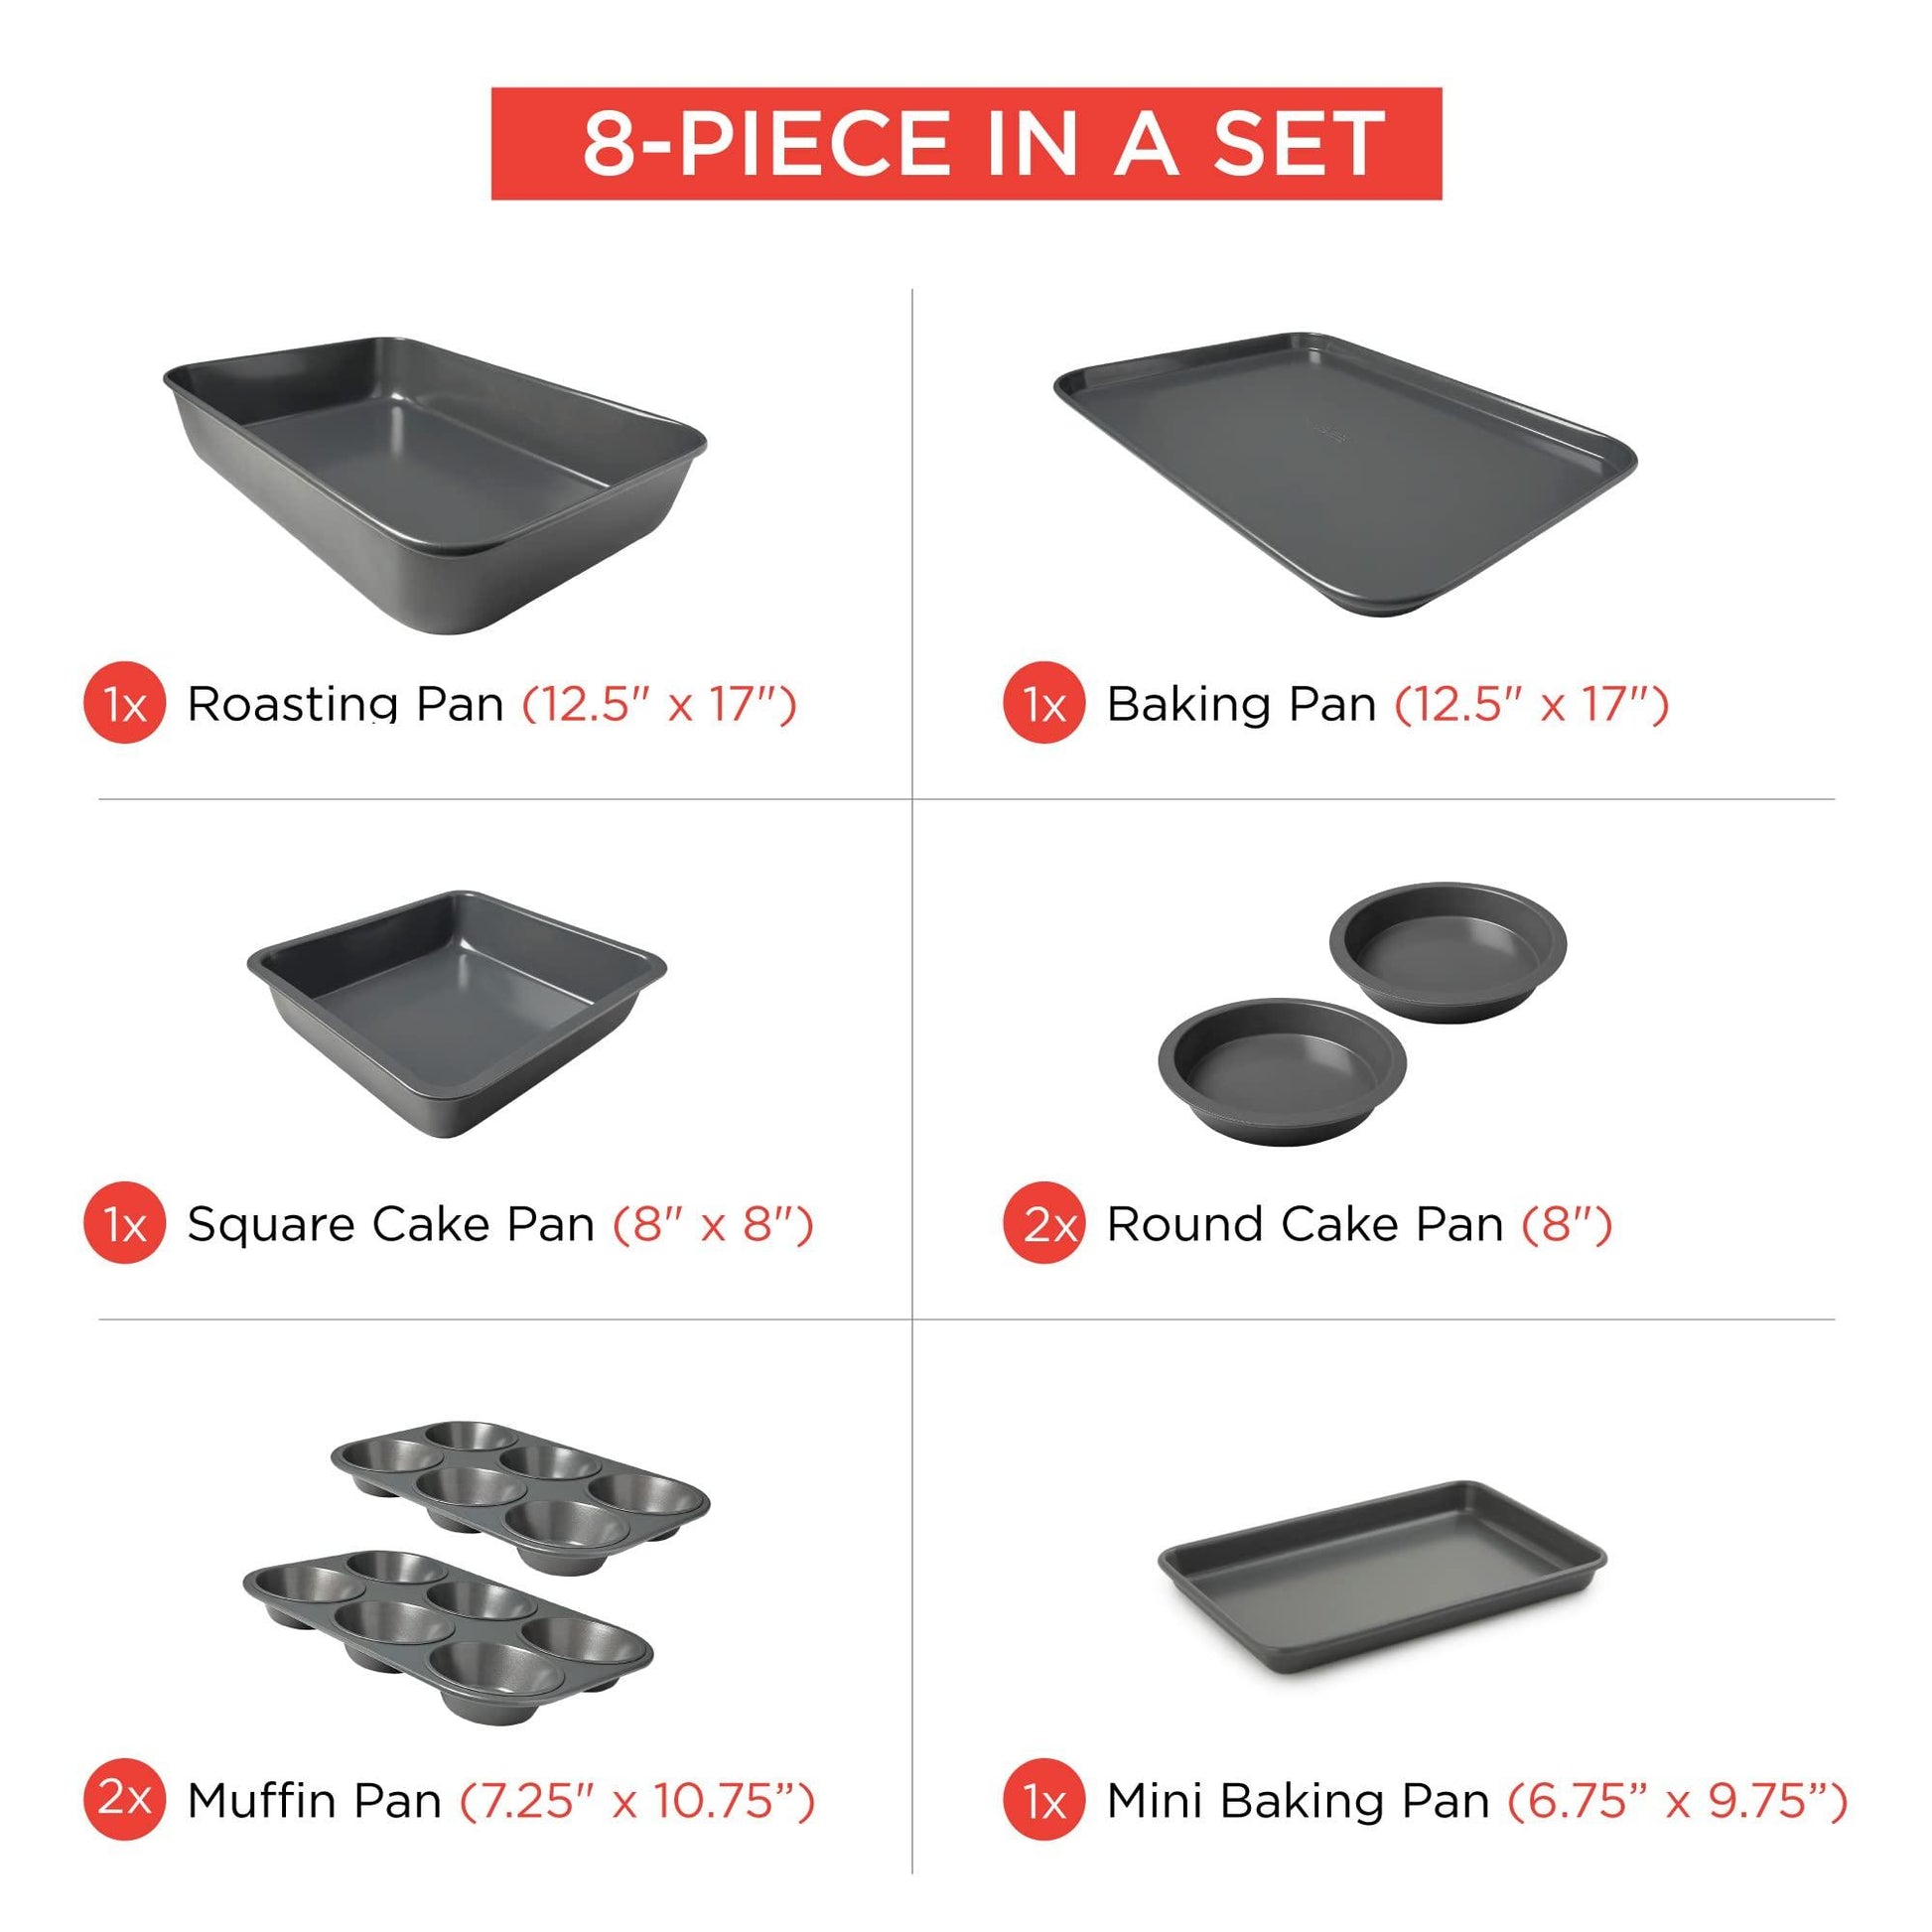 Elbee Home 8-Piece Nonstick Aluminized Steel, Space Saving Baking Set , With Deep Roasting Pan, Cookie Sheet, Cake Pans, Muffin Pans and Baking Pan PFOA & PFOS Free - CookCave